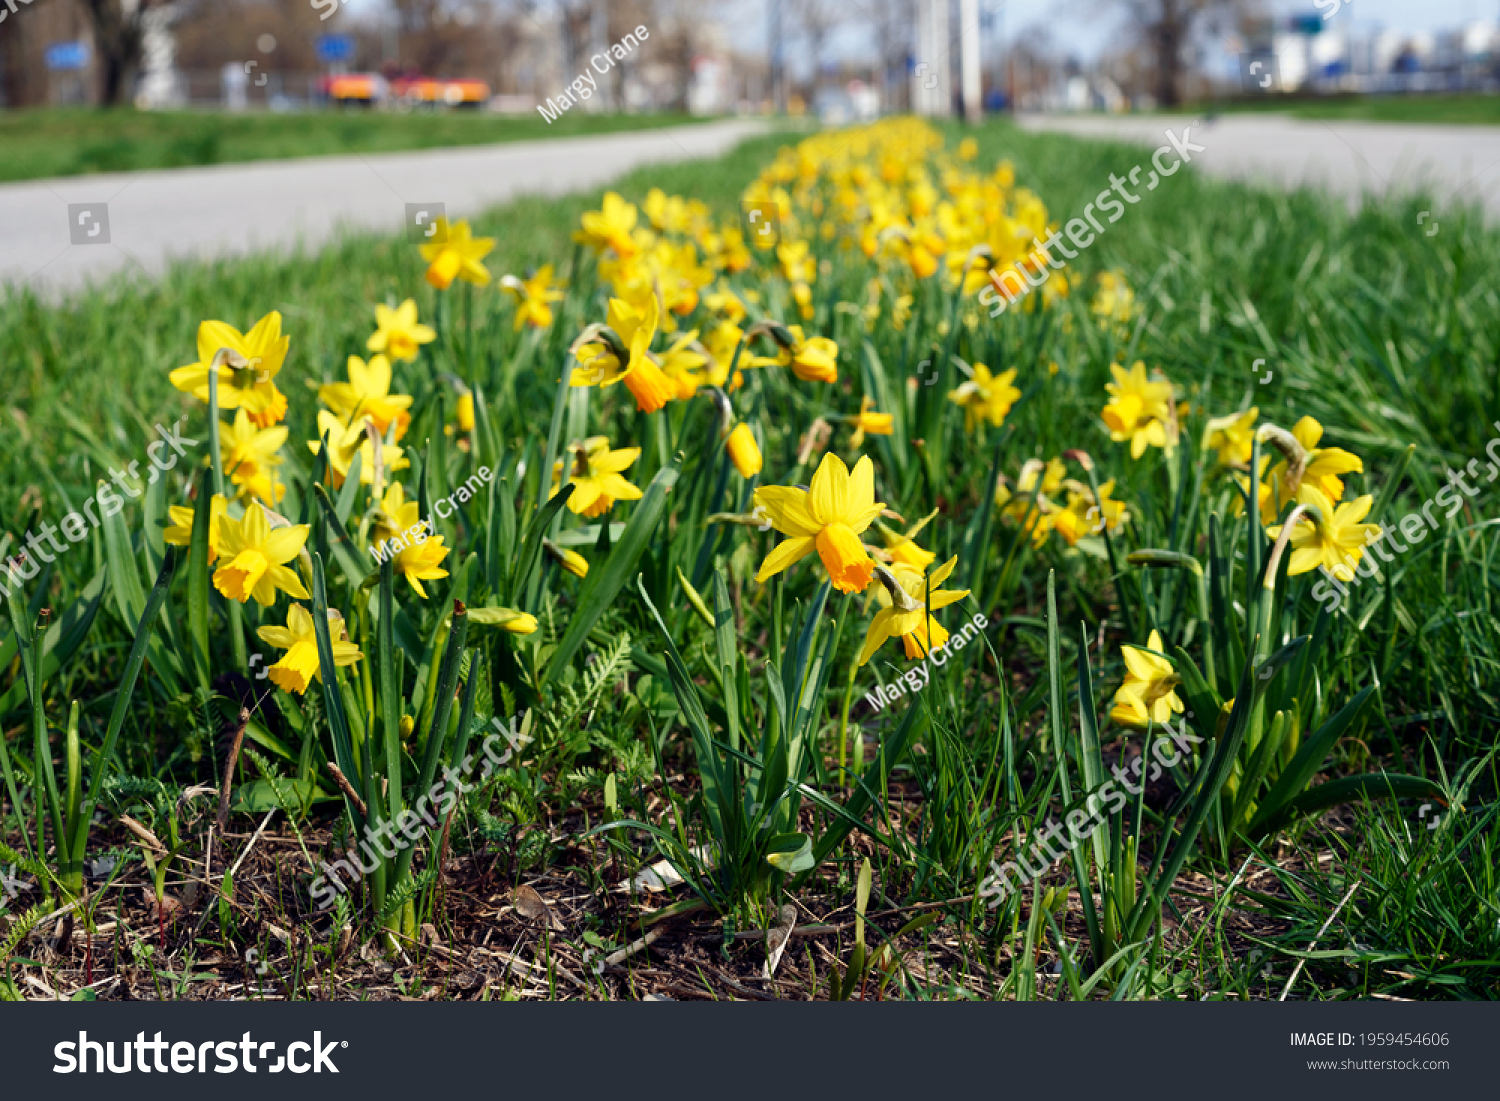 Poland, Warsaw, April 2021. Spring in the city. A row of blooming daffodils embellishes the urban landscape. Daffodils are a symbol of the Warsaw Ghetto Uprising that broke out in 1943, on April 19.   #1959454606